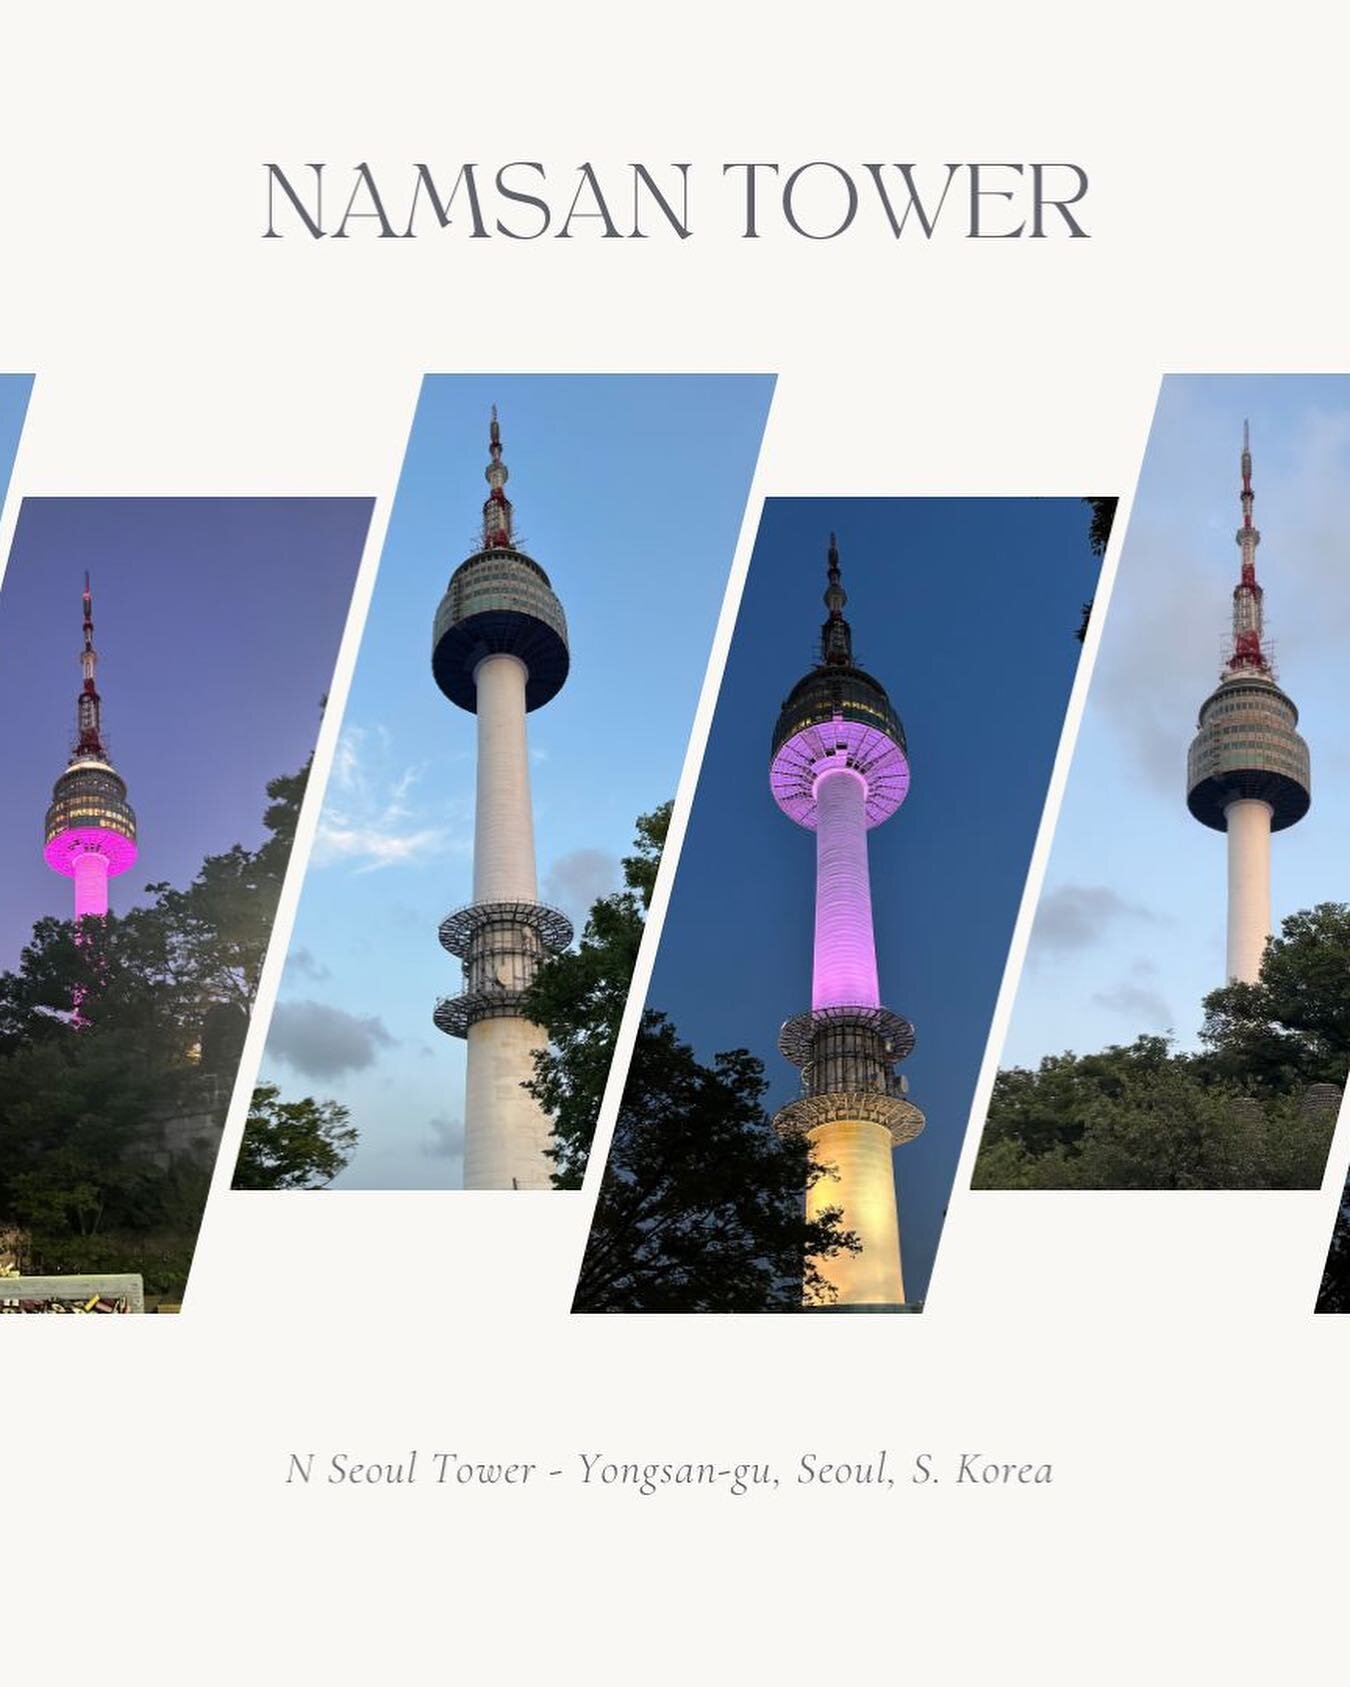 Namsan Tower (aka N Seoul Tower) is one of the most iconic sights in Seoul. Located on Nam Mountain the 774-foot tall tower marks the second highest point in Seoul. It&rsquo;s both a communication and observation tower that broadcasts signals for Kor